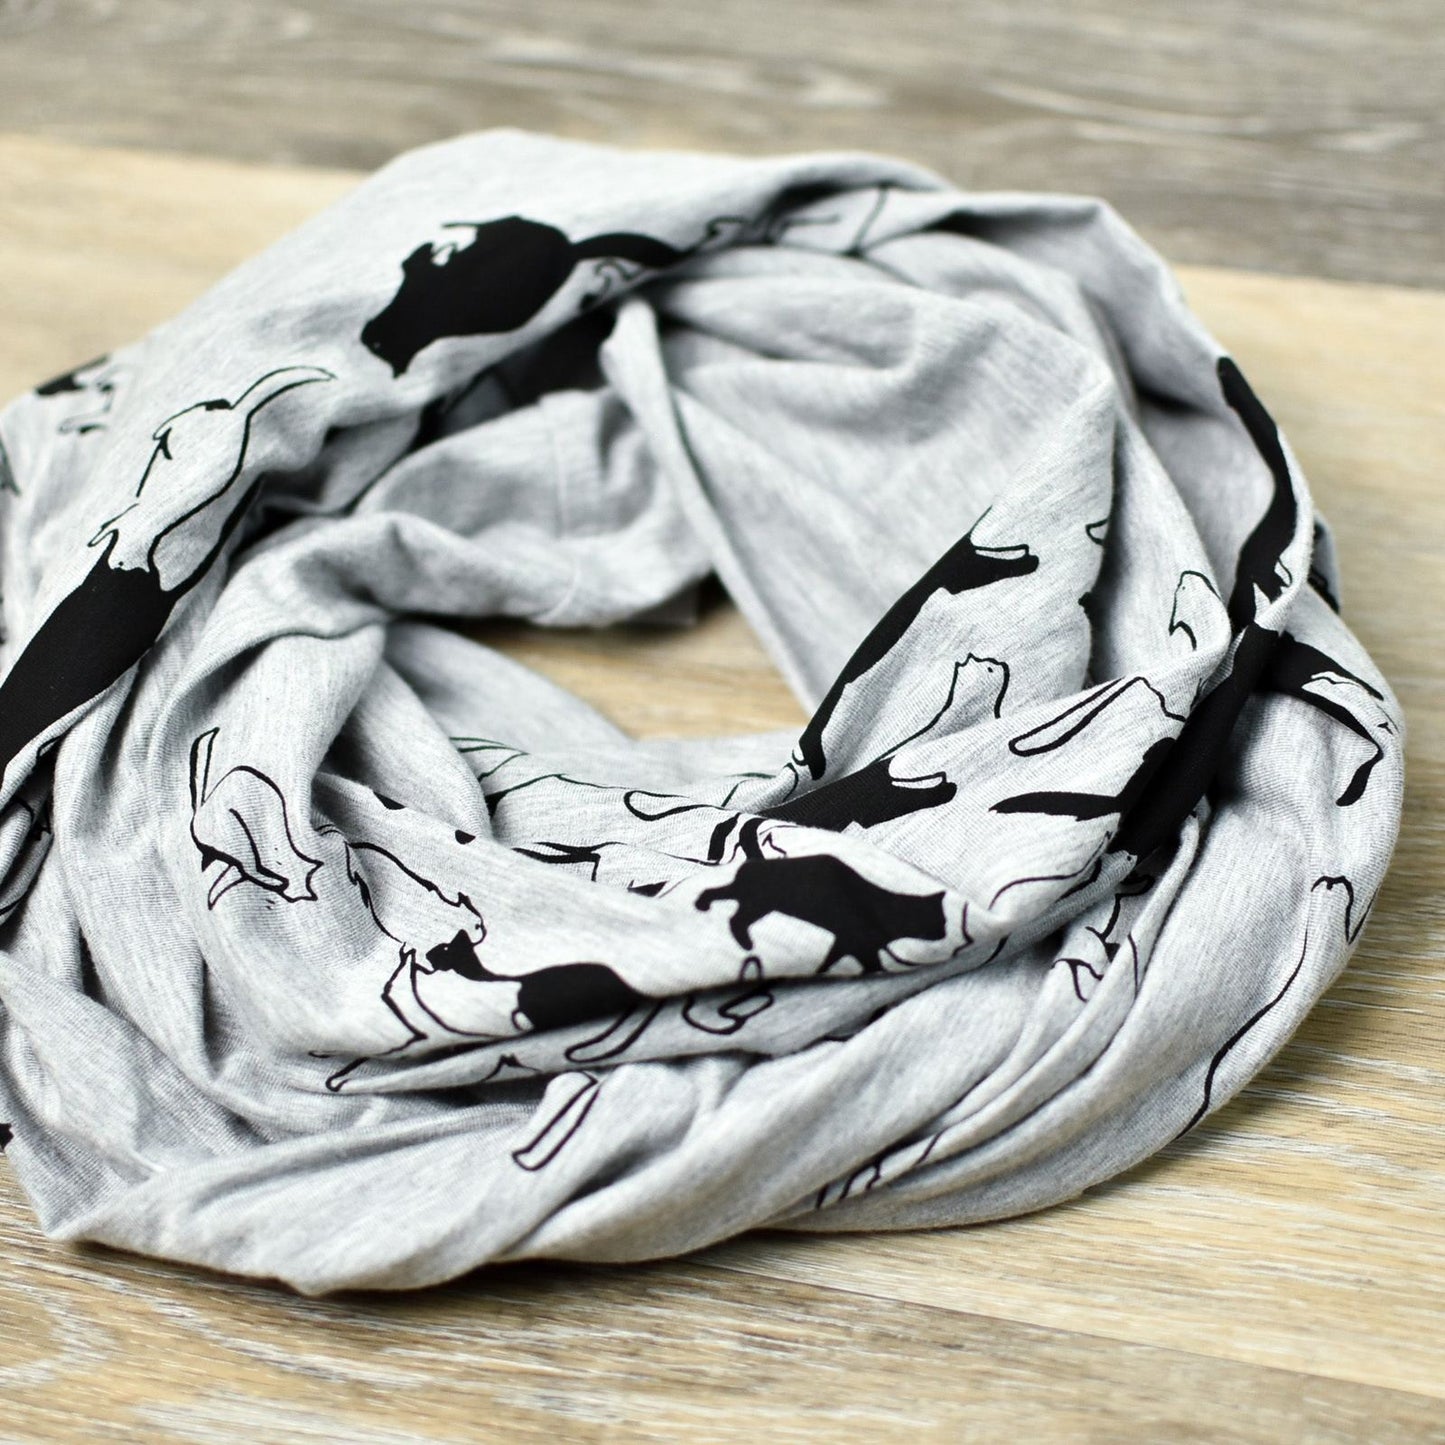 Infinity Scarf - Grey and Black Cats poison-pear